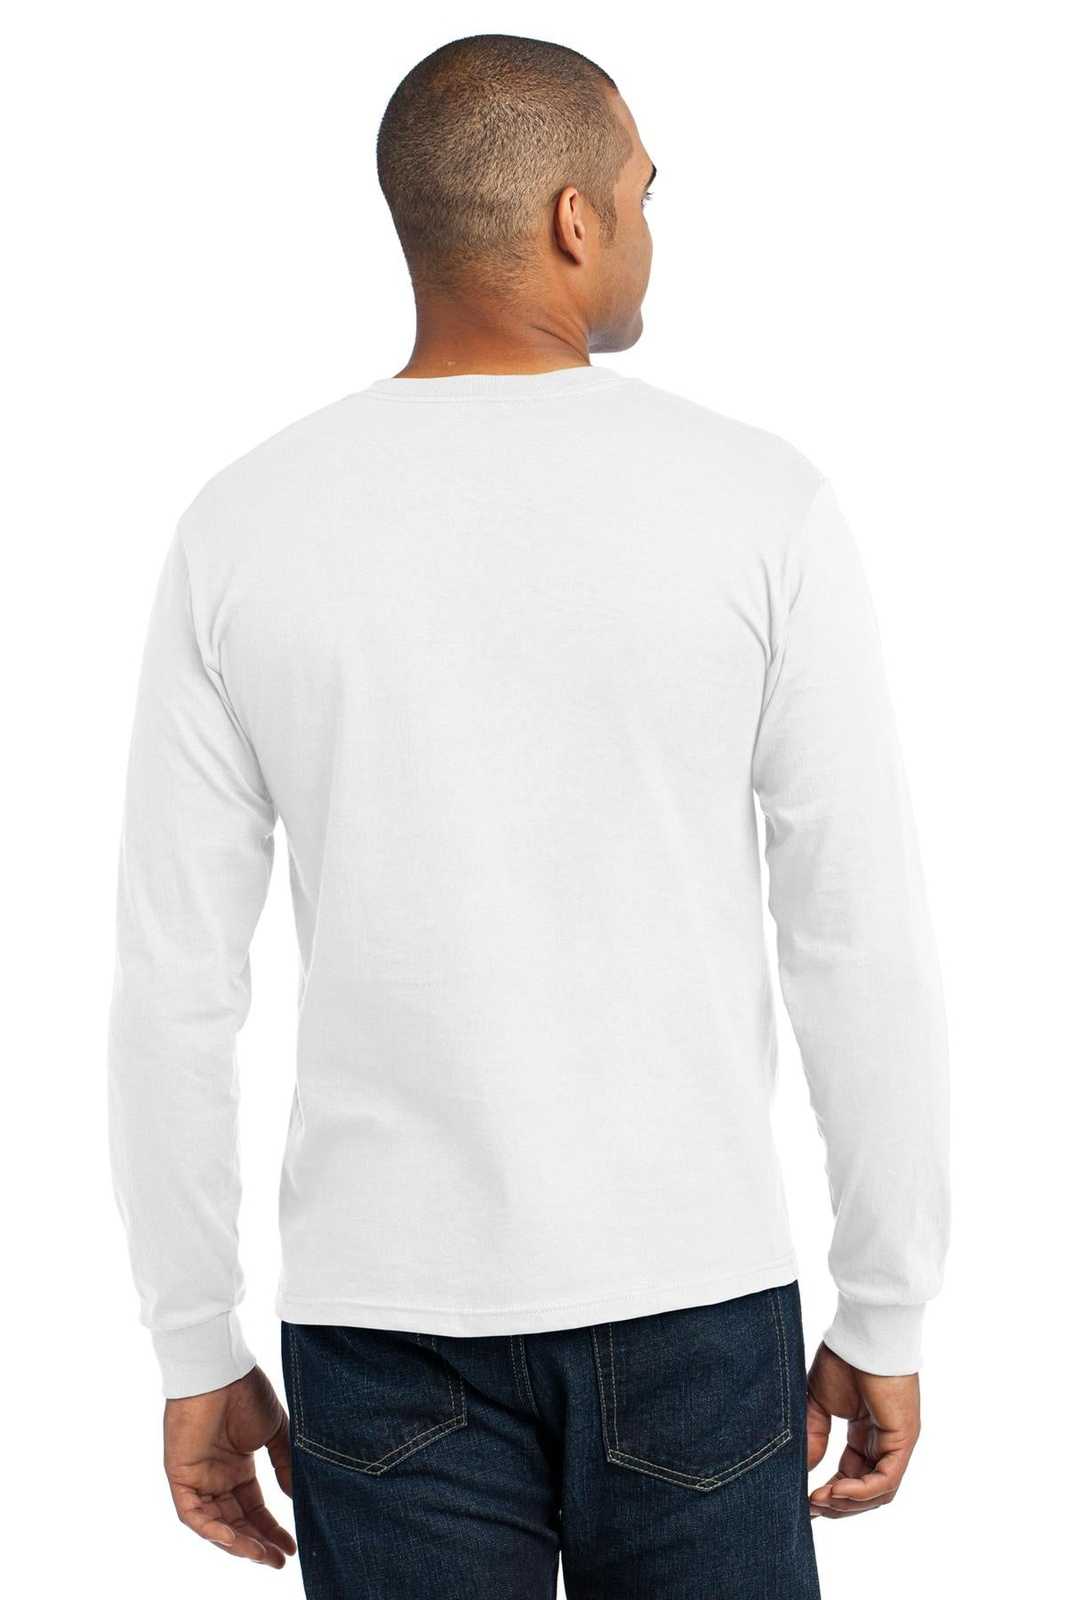 Port & Company USA100LS Long Sleeve All-American Tee - White - HIT a Double - 1